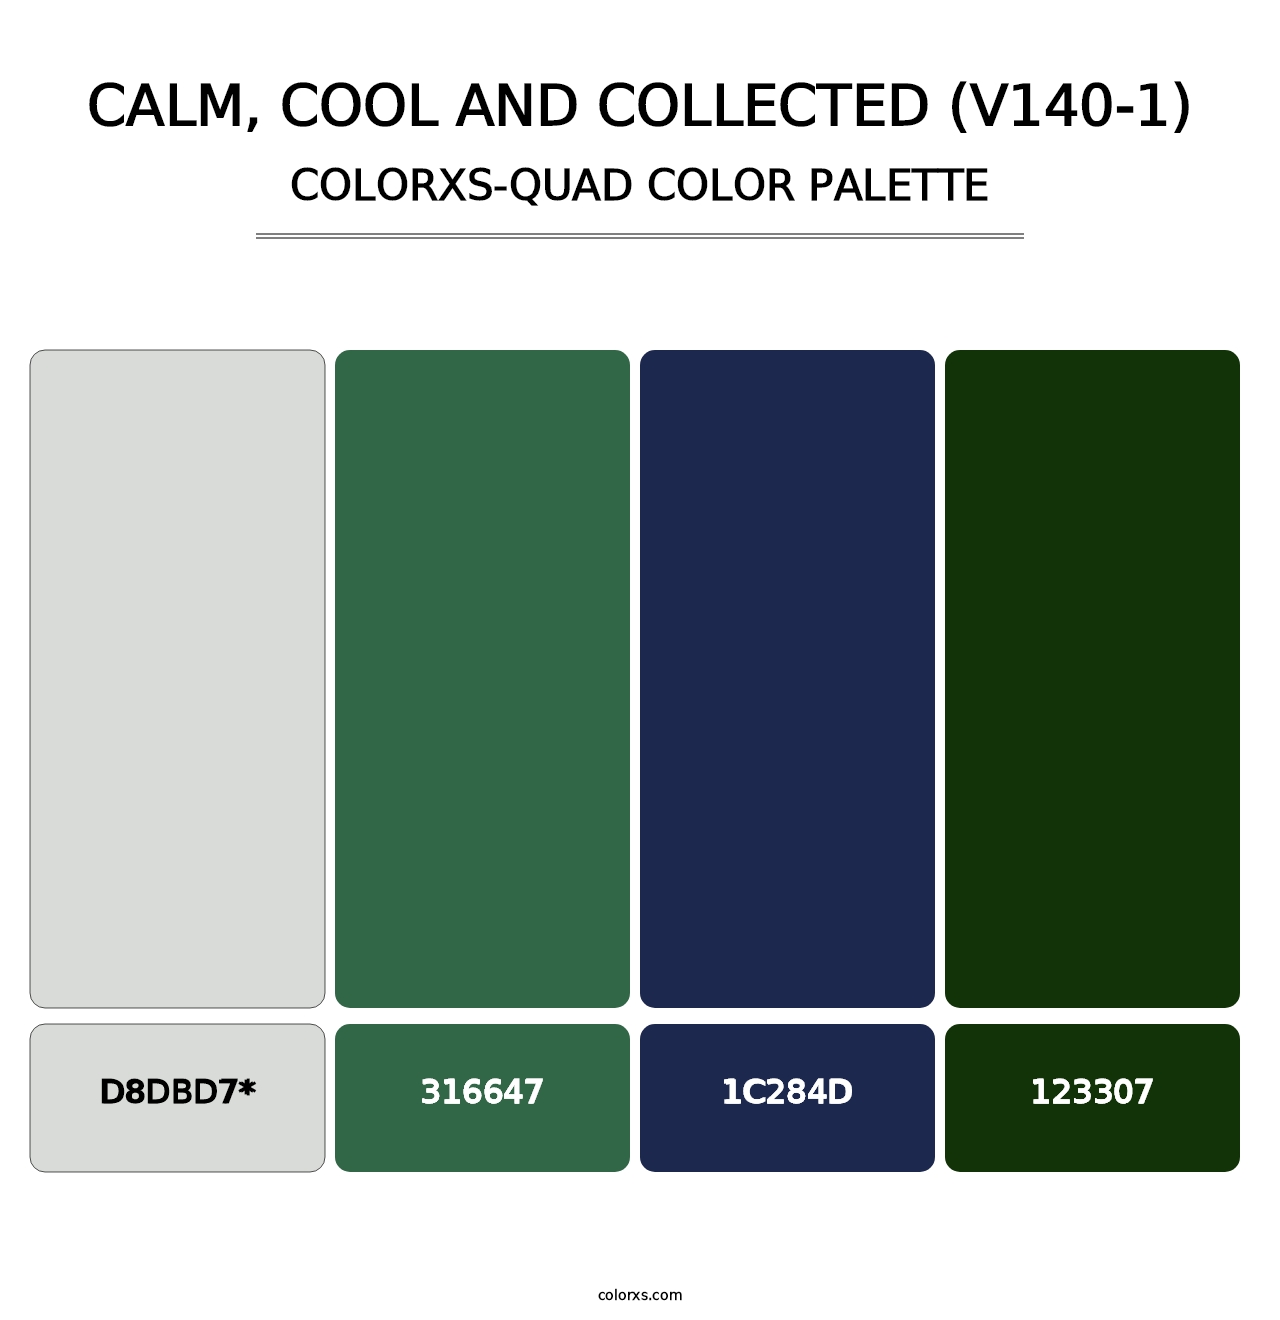 Calm, Cool and Collected (V140-1) - Colorxs Quad Palette